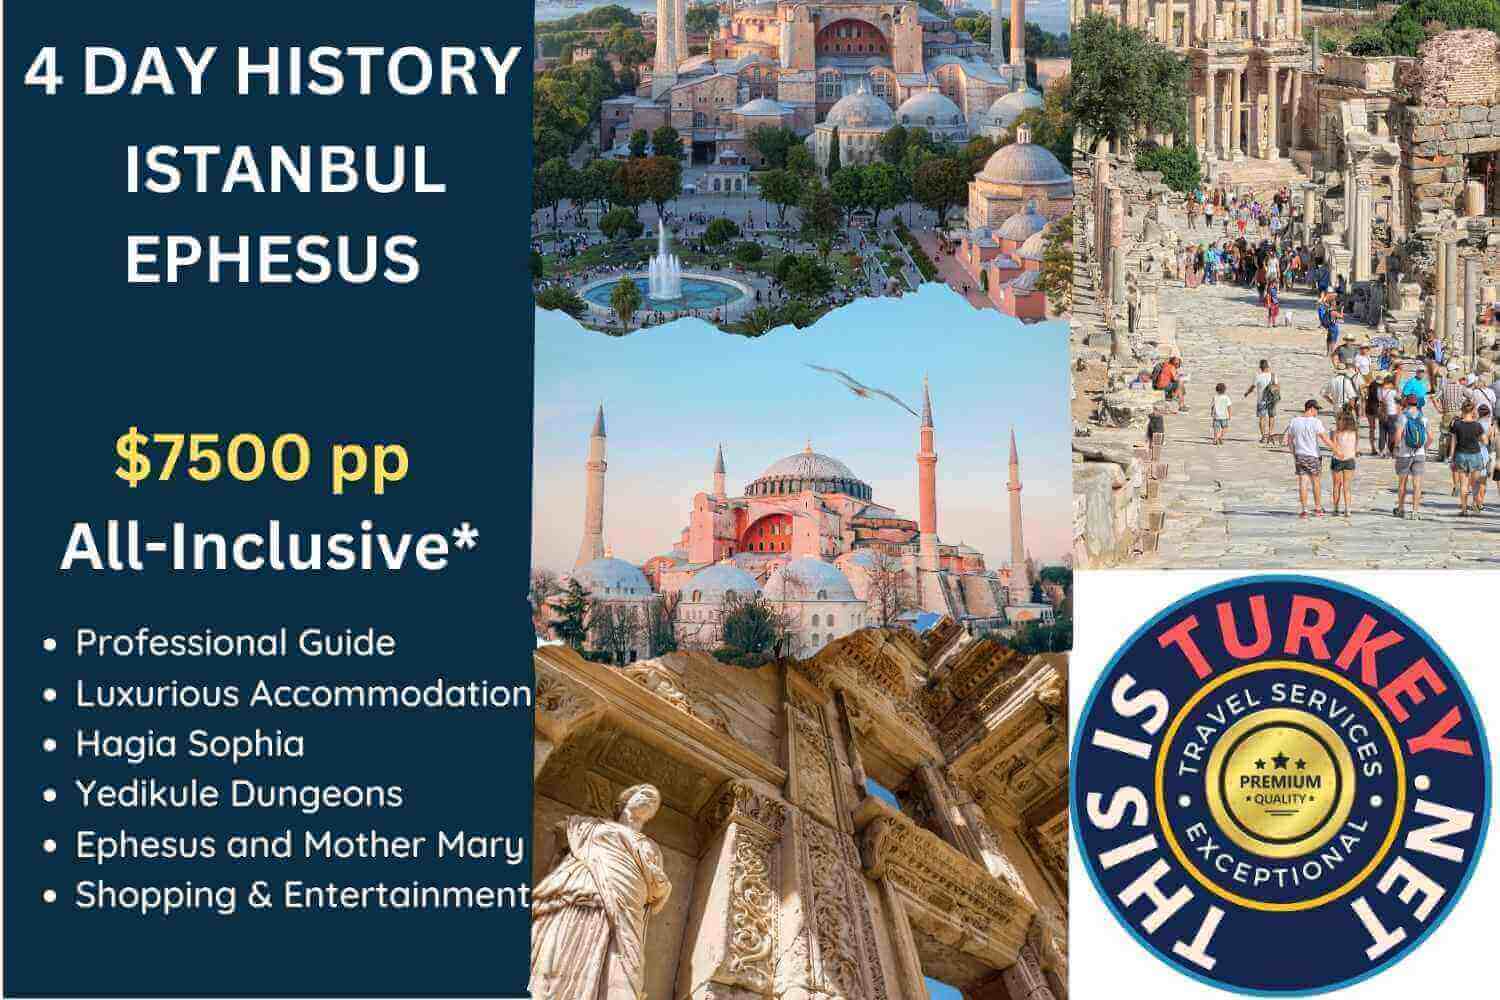 This tour is ideal for couples or small families who wish to have a short break with no hassles where History and faith are combined. This fantastic four-day tour starts and ends in Istanbul. There is a minimum of two people required for booking.